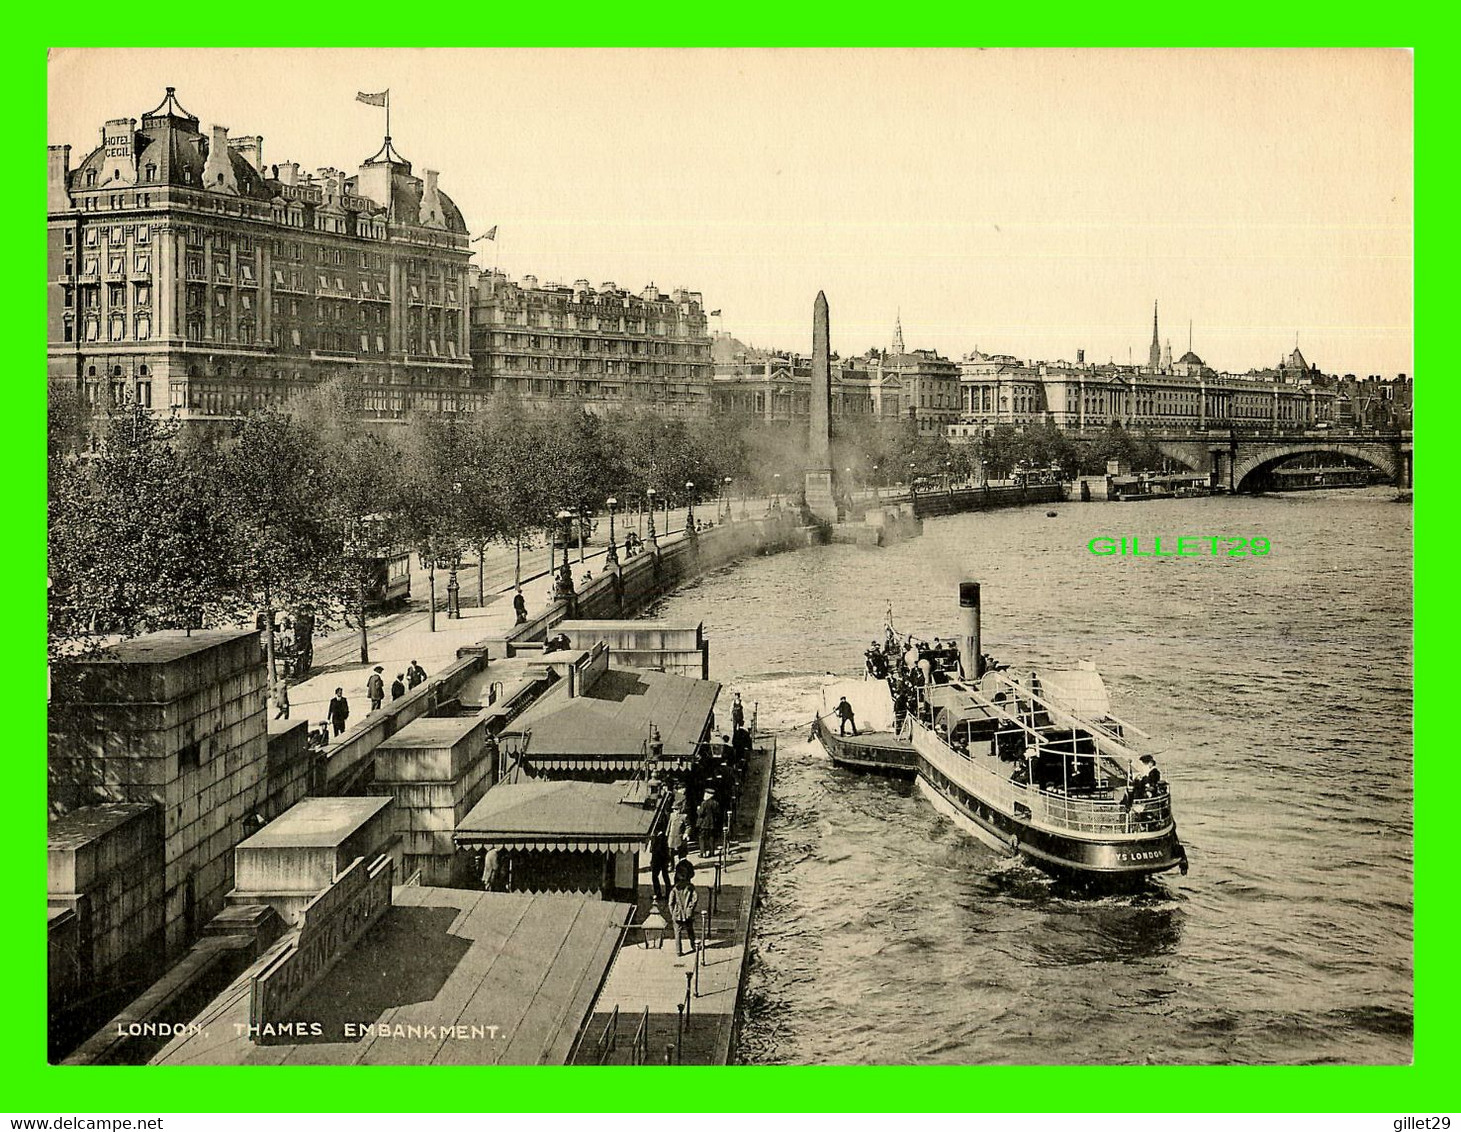 LONDON, UK - THAMES EMBANKMENT - ANIMATED WITH PEOPLES & SHIP - DIMENSION 15 X 20 Cm - - River Thames